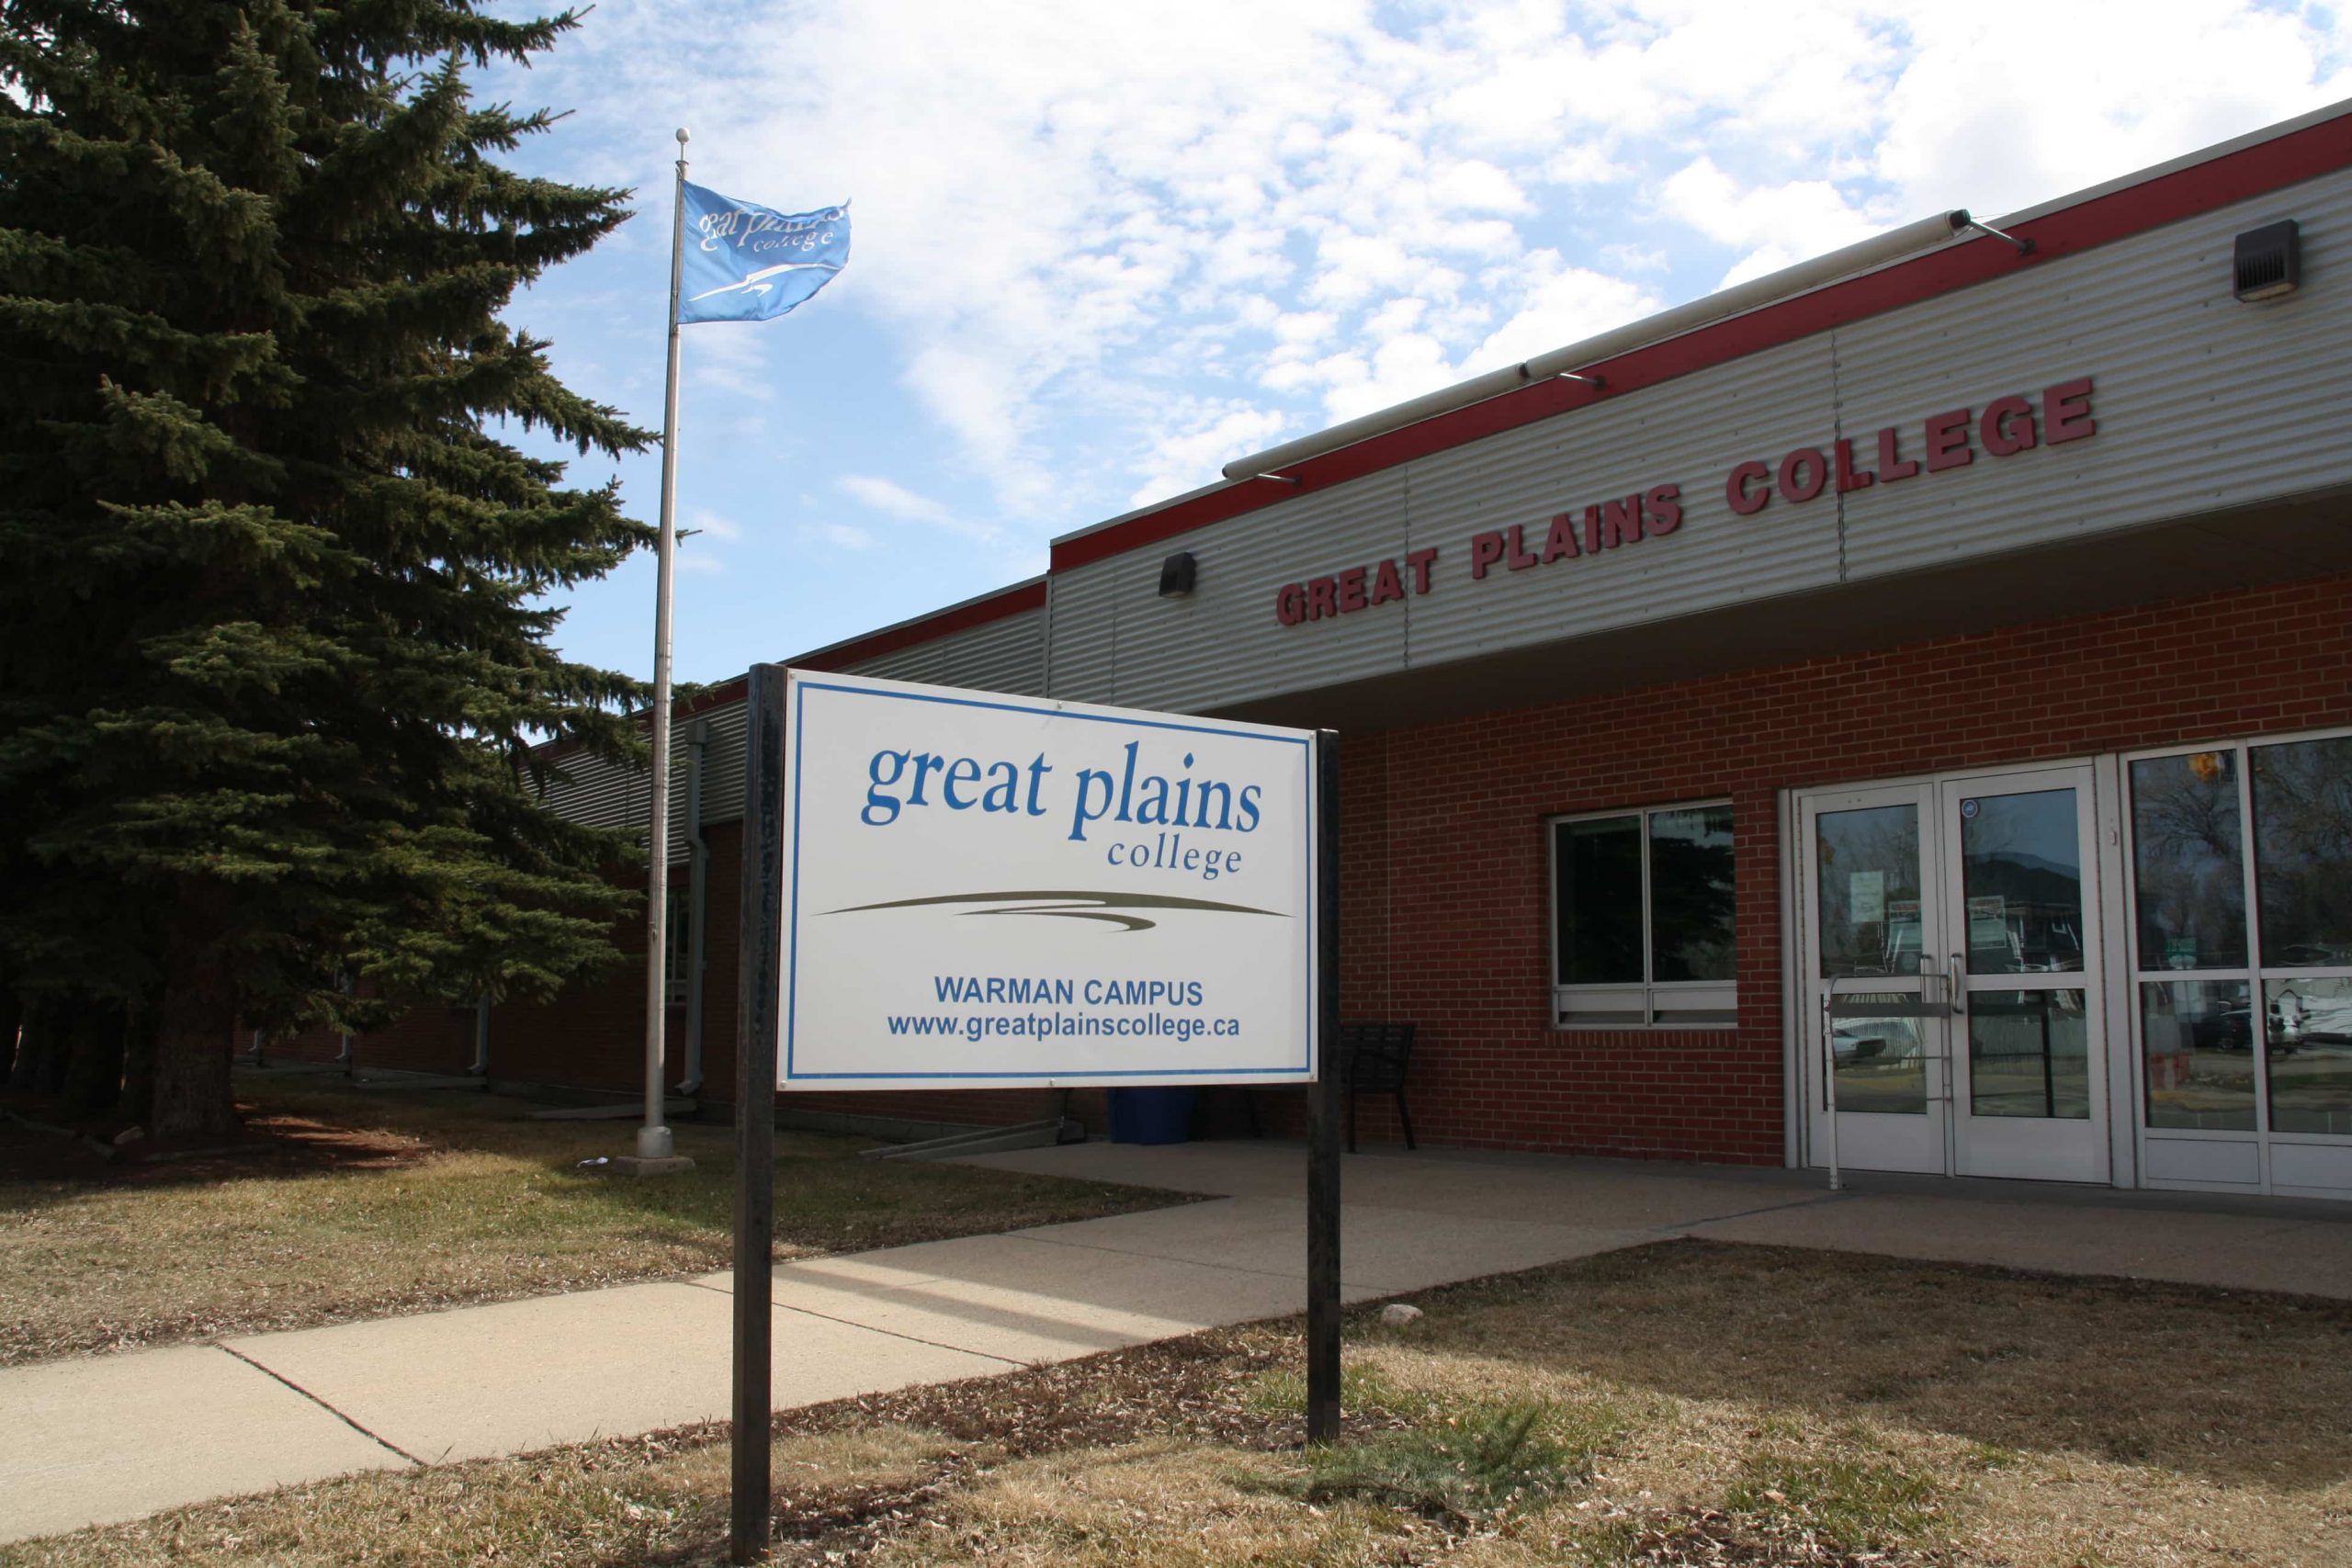 Great Plains College
